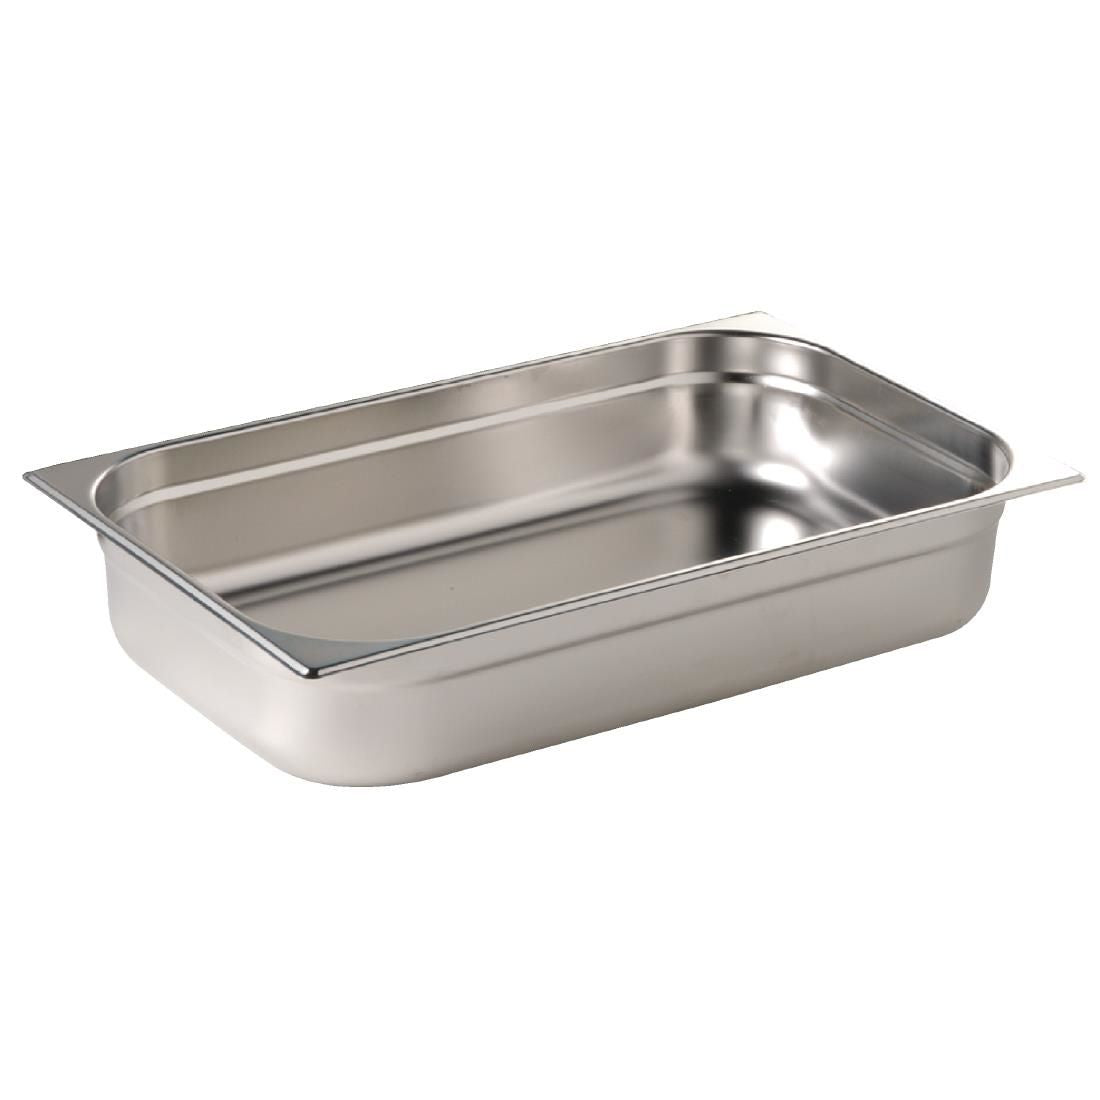 K903 Vogue Stainless Steel 1/1 Gastronorm Pan 65mm